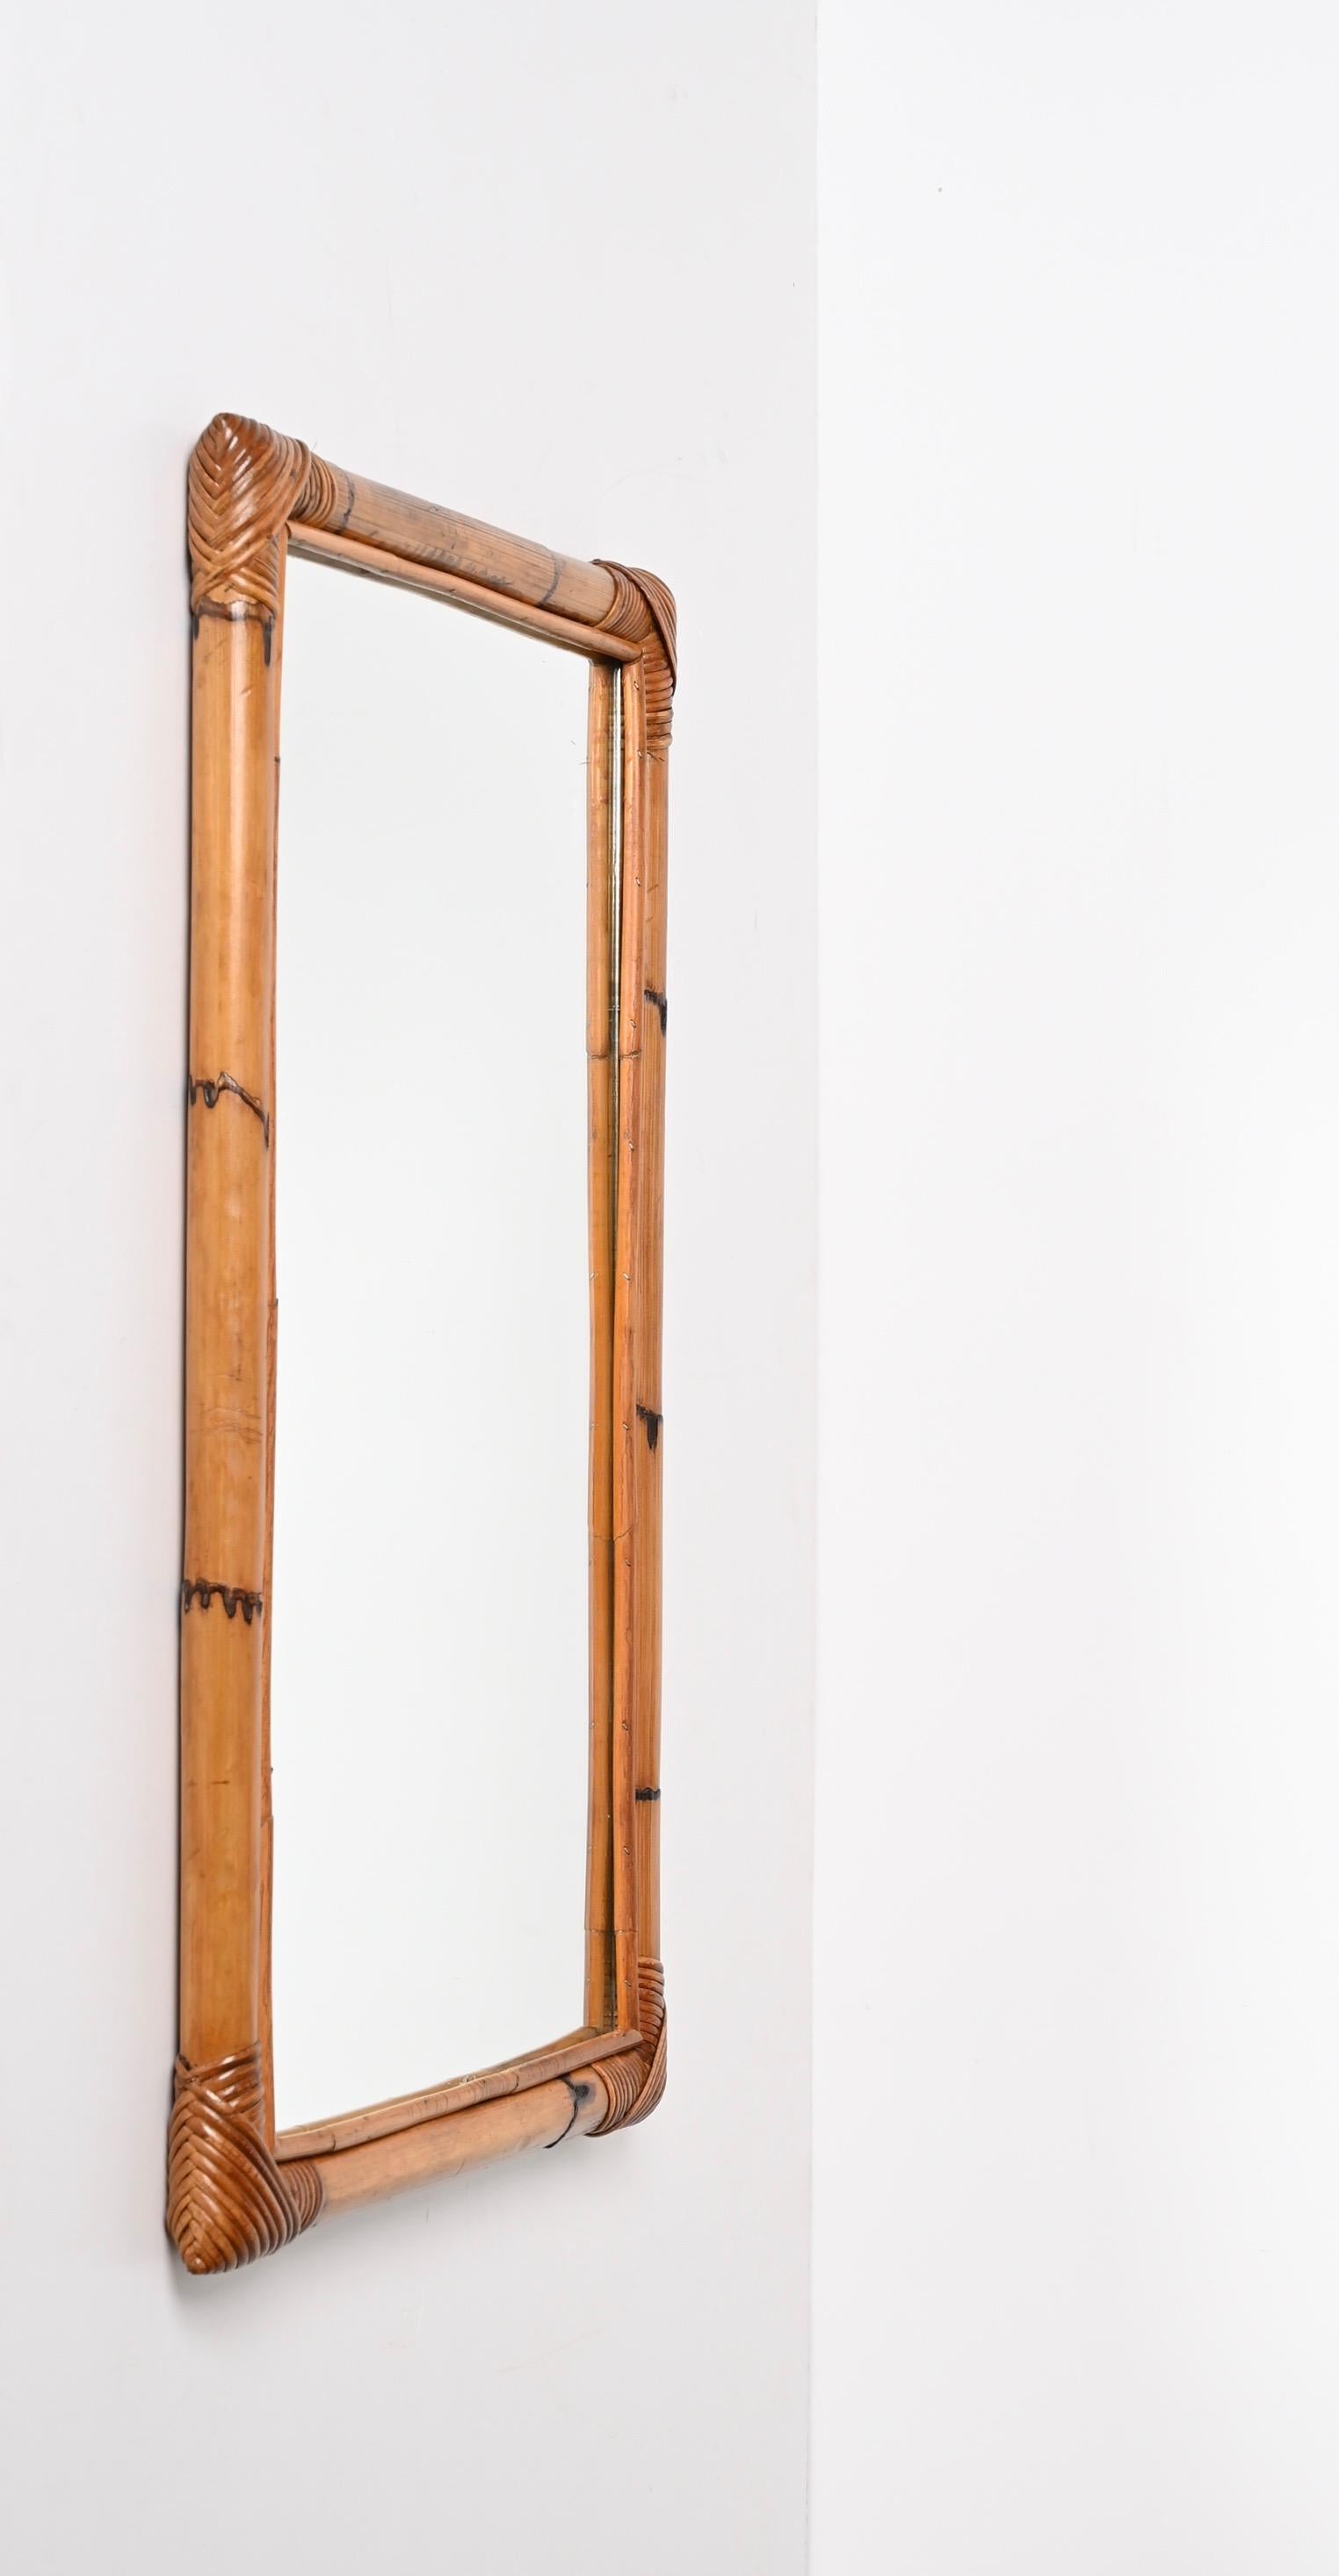 Midcentury Rectangular Italian Mirror with Double Bamboo Cane Frame, 1970s For Sale 7